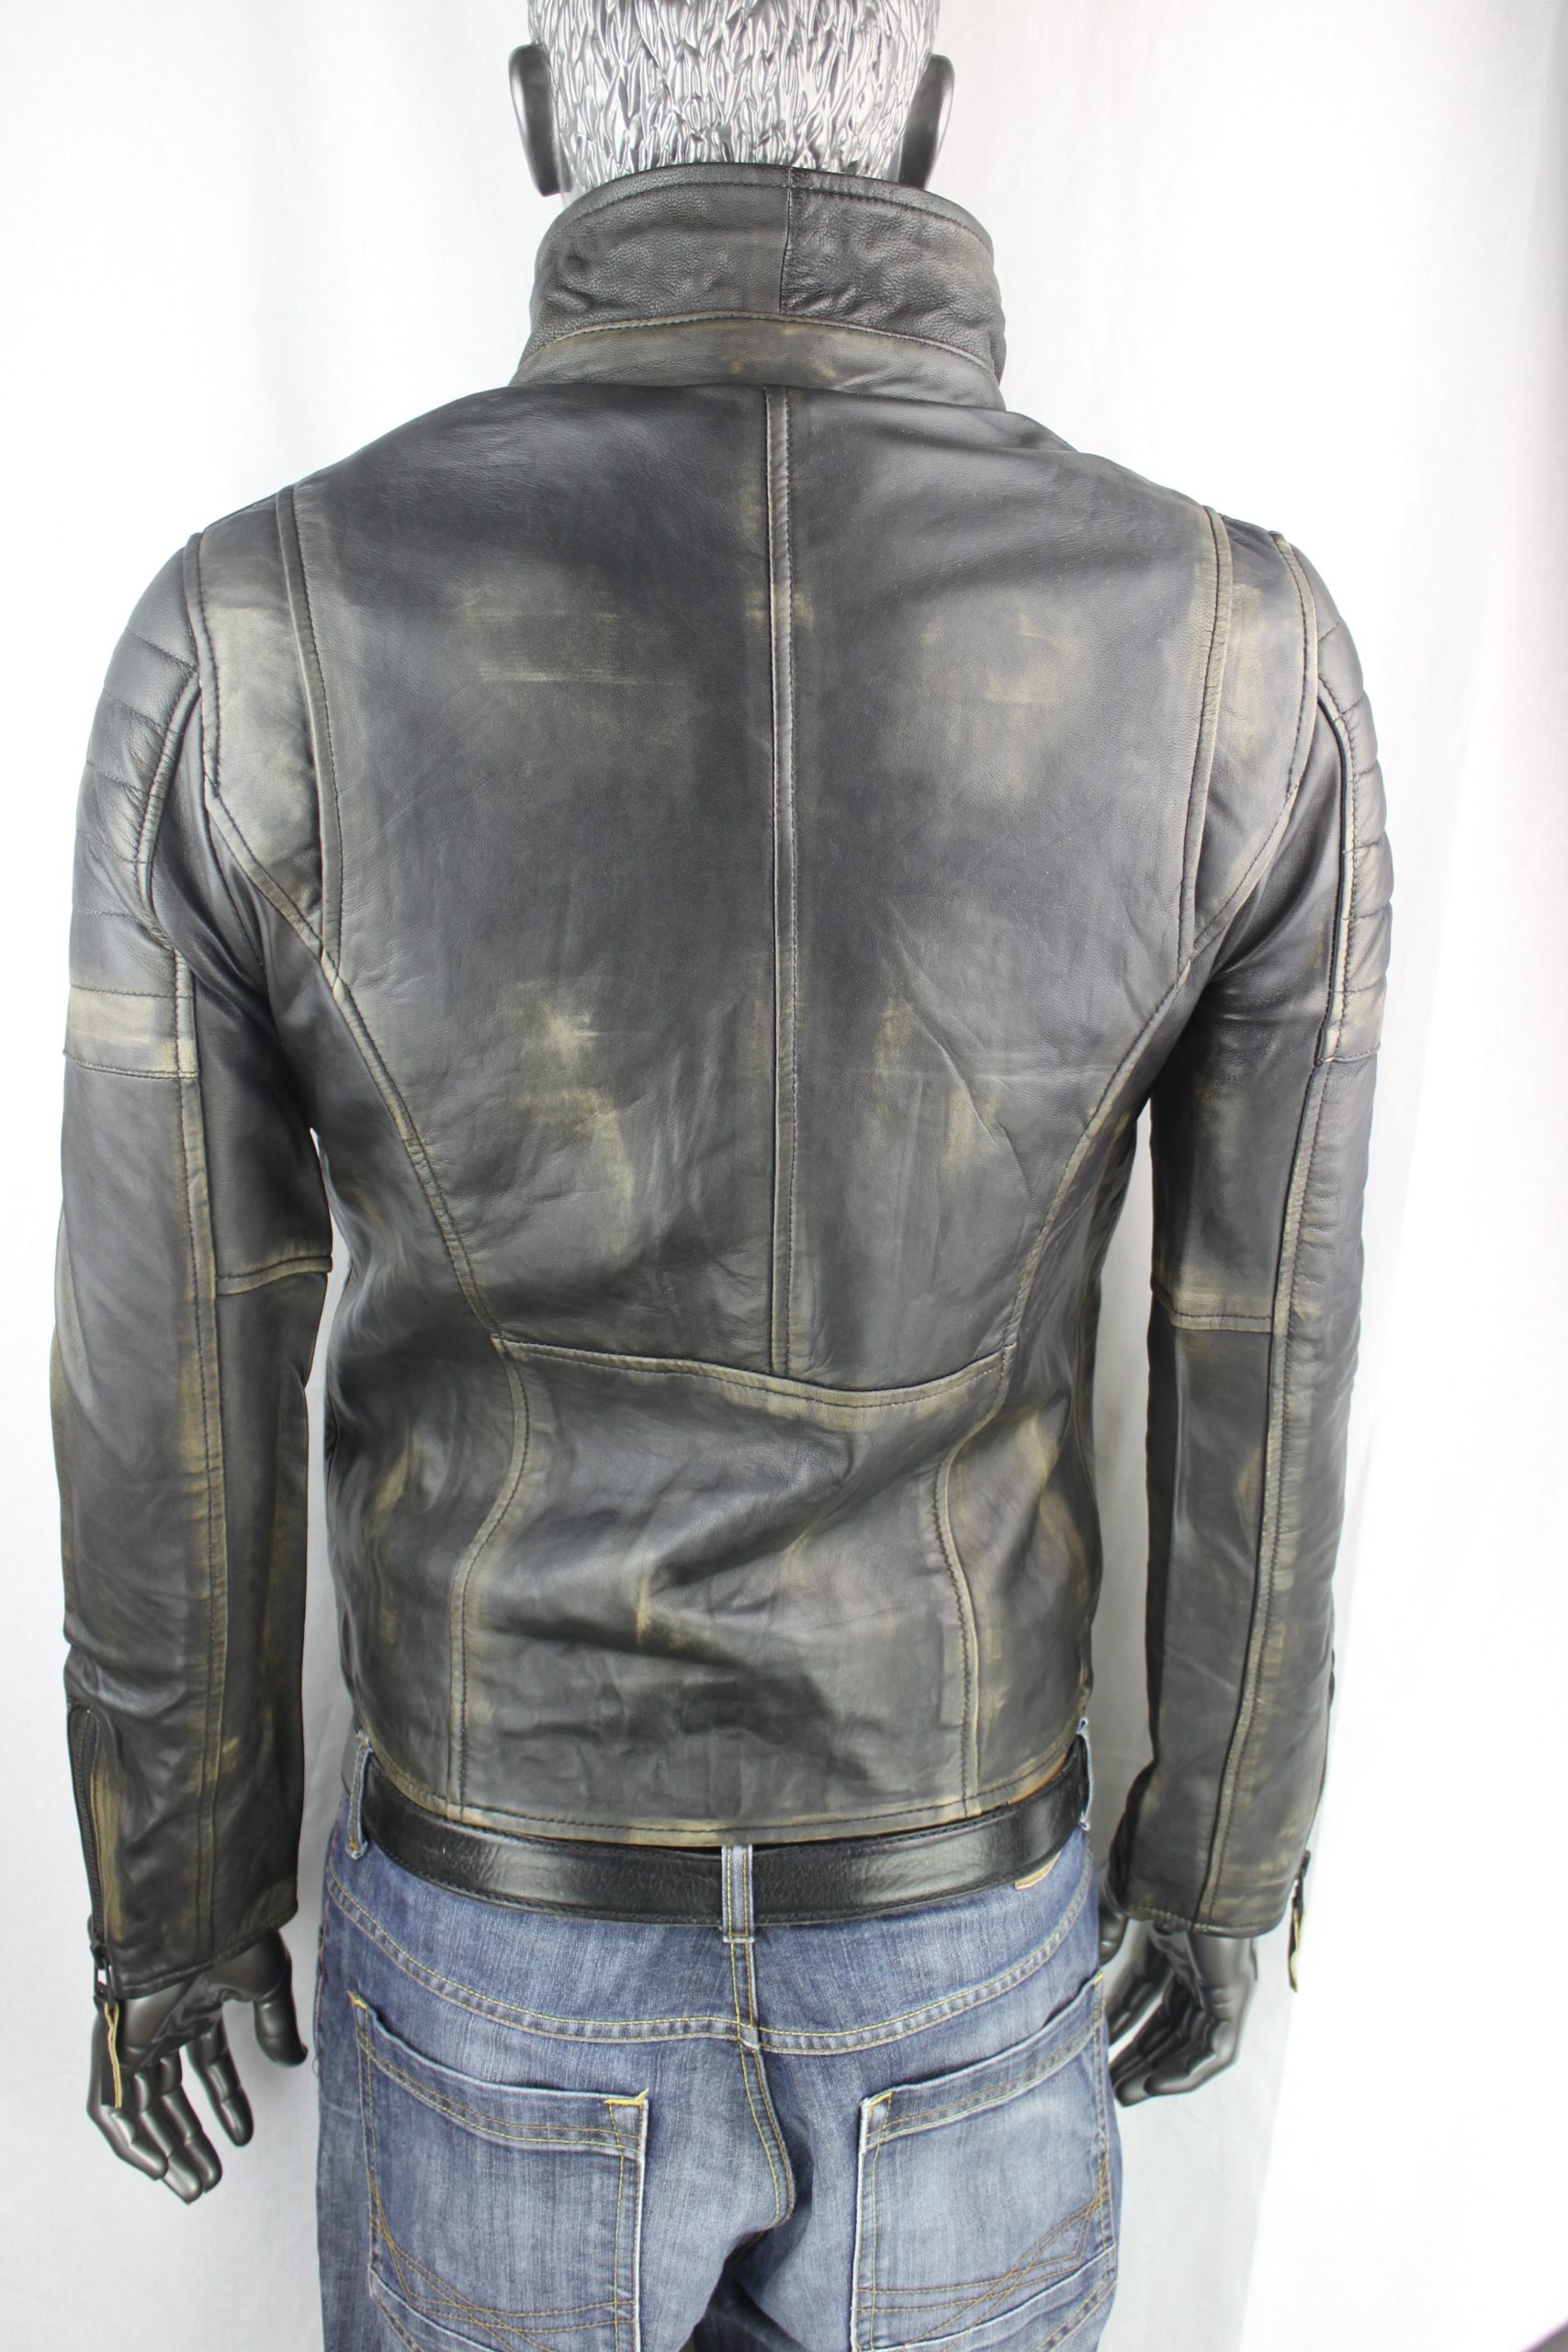 Men's Leather Denim Style Jacket in Black – Radford Leather  Fashions-Quality Leather and Sheepskin Jackets for Men and Women. Coventry,  West Midlands, UK for over 40 years